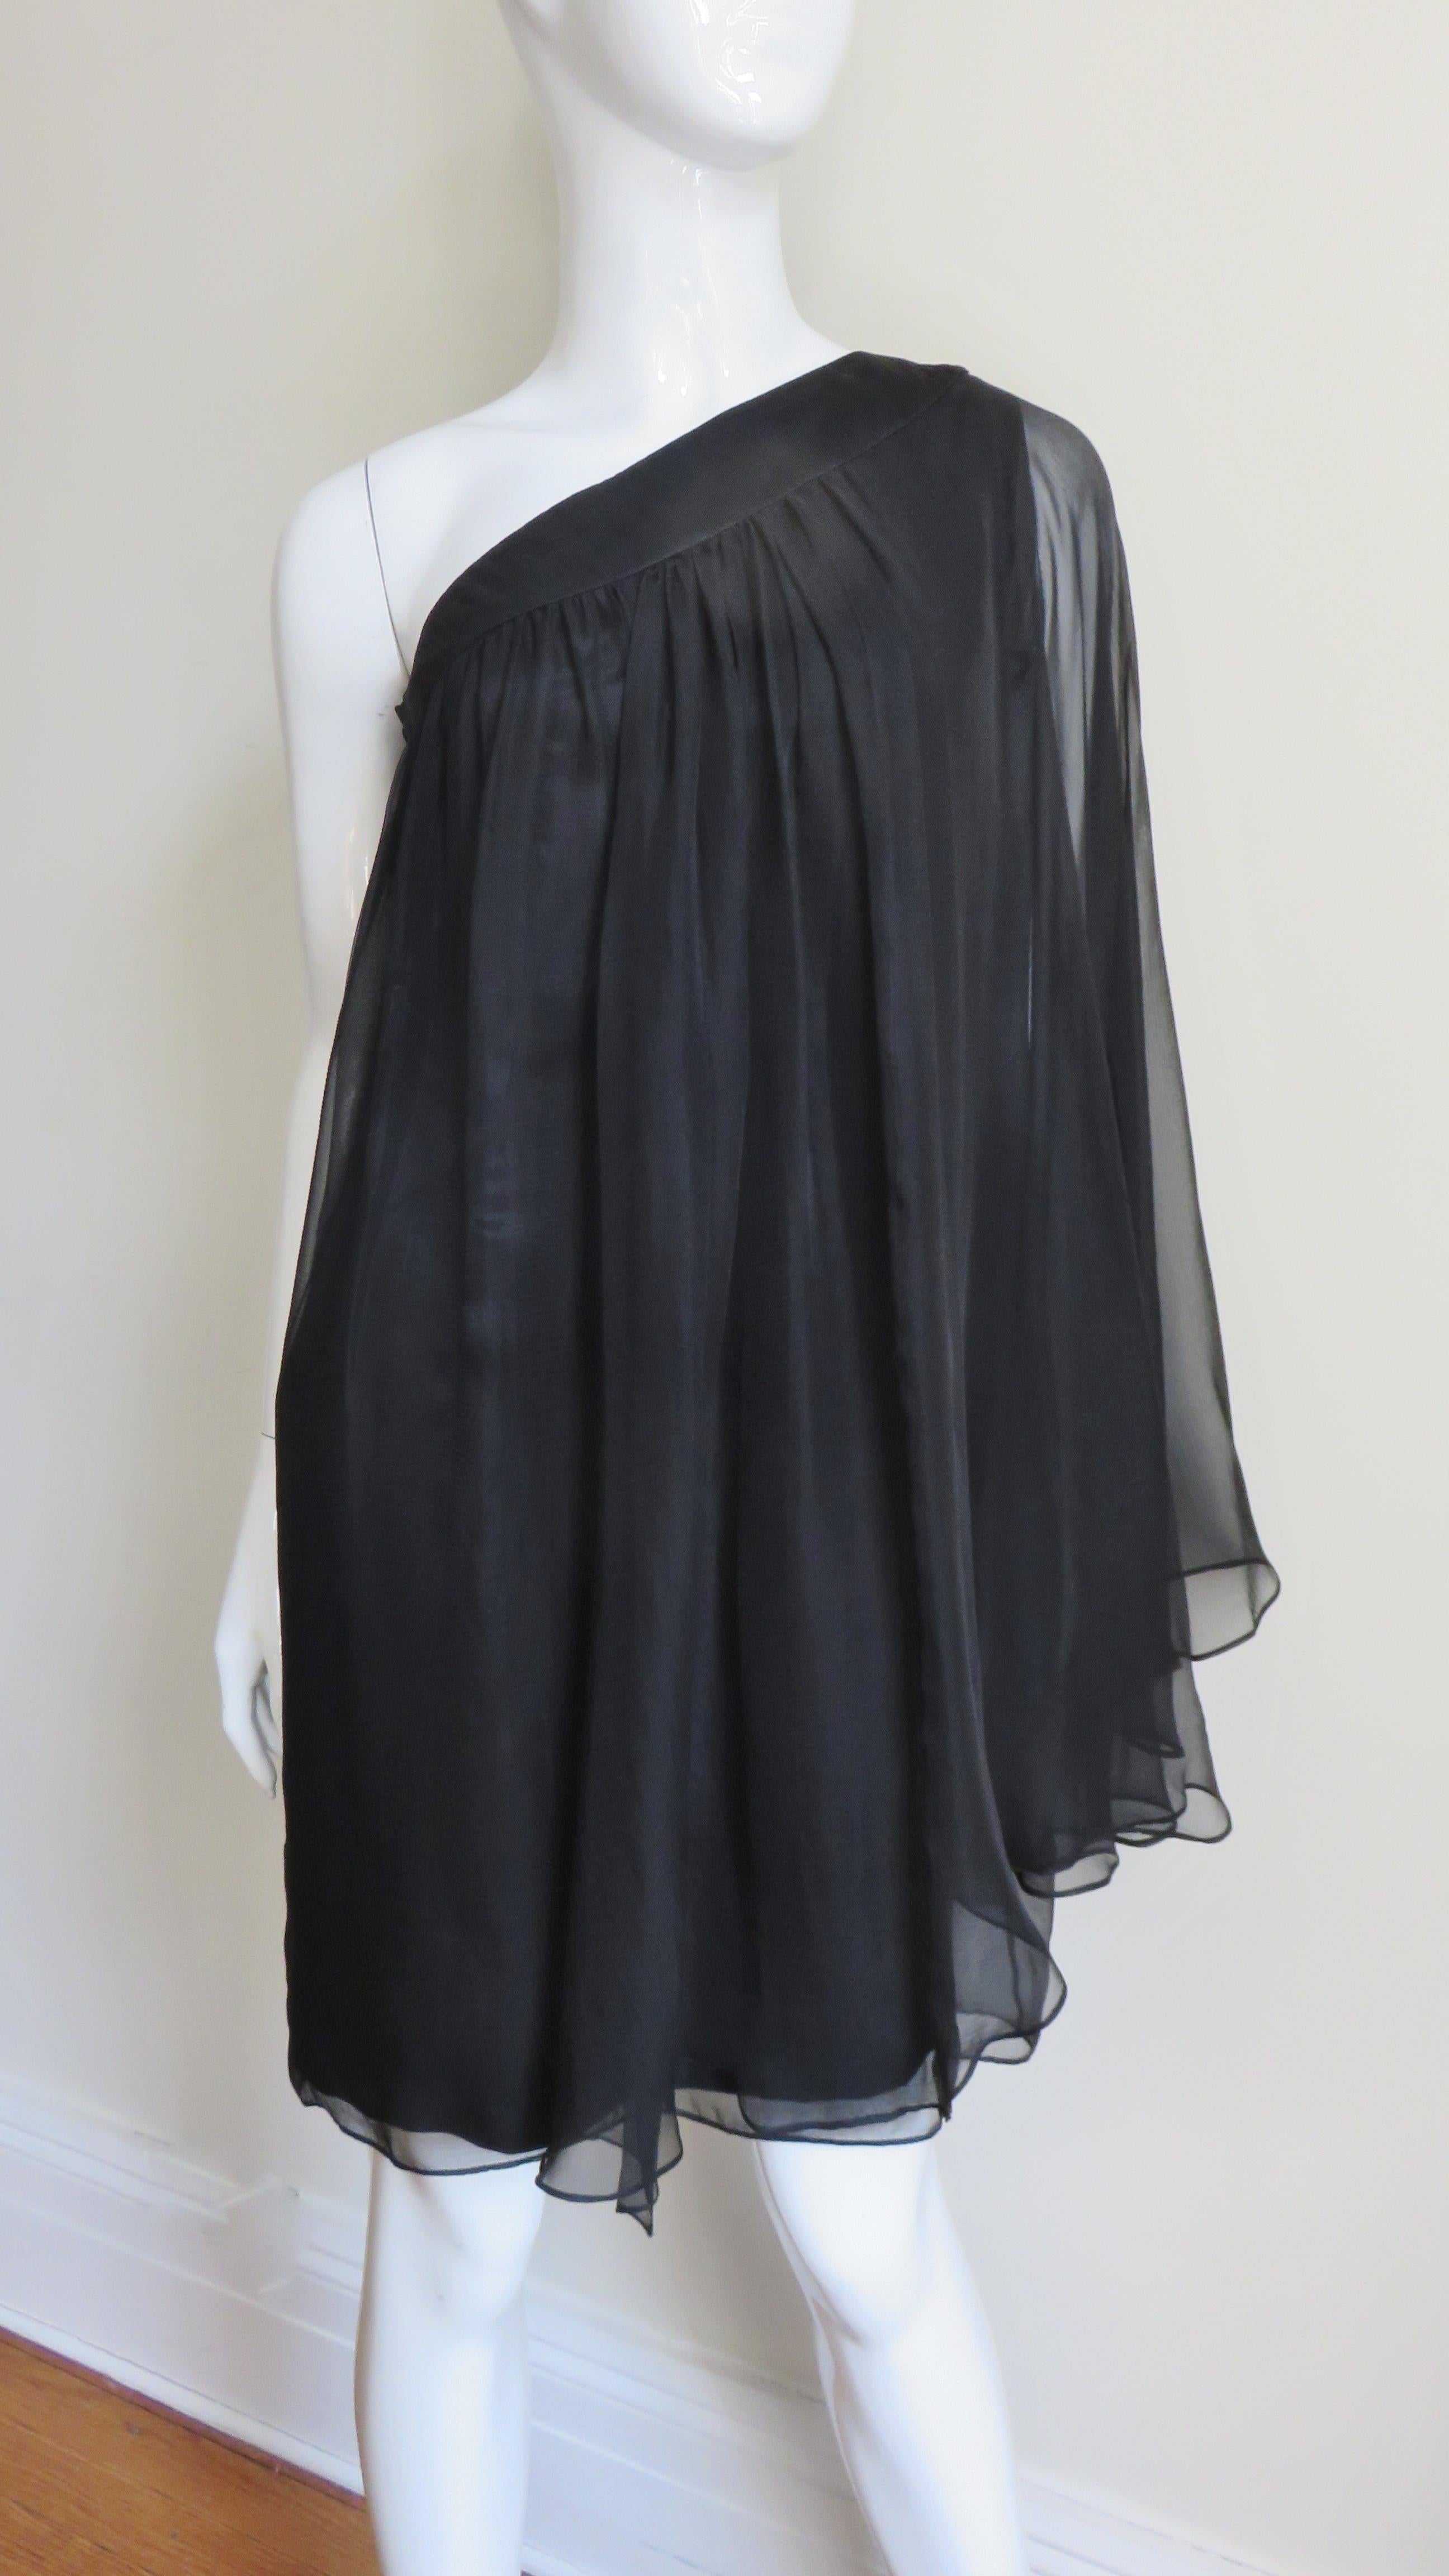 A beautiful ethereal one shoulder dress from Christian Dior comprised of layers of semi sheer black silk over an opaque silk under dress.  It has one shoulder with 2 panels of softly gathered semi sheer silk which can drape over the arm or leave it